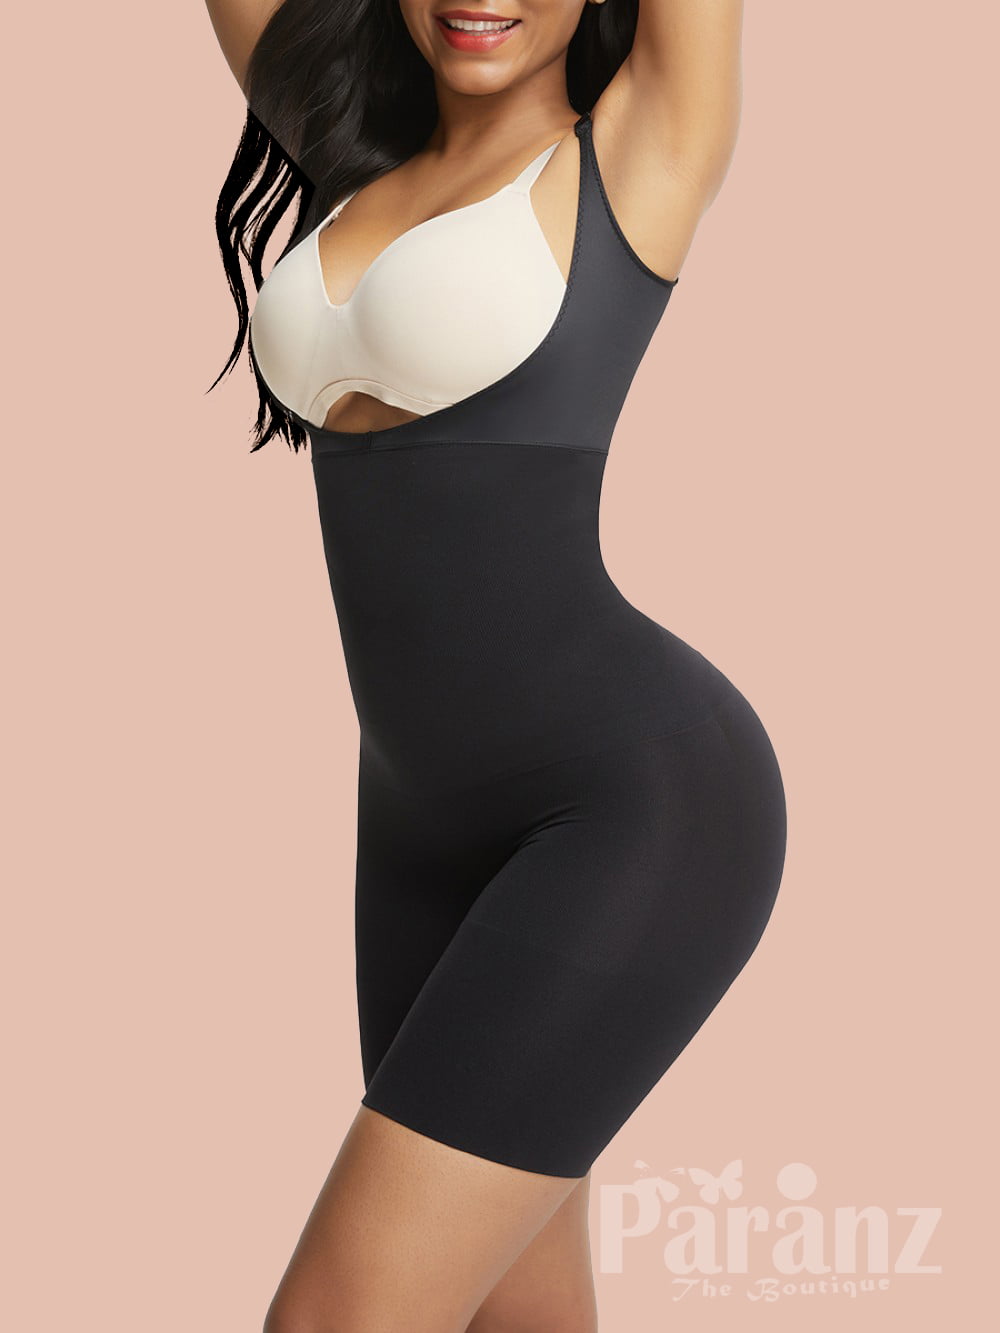 Body shaper  Body shapers, Shaper, Black and nude